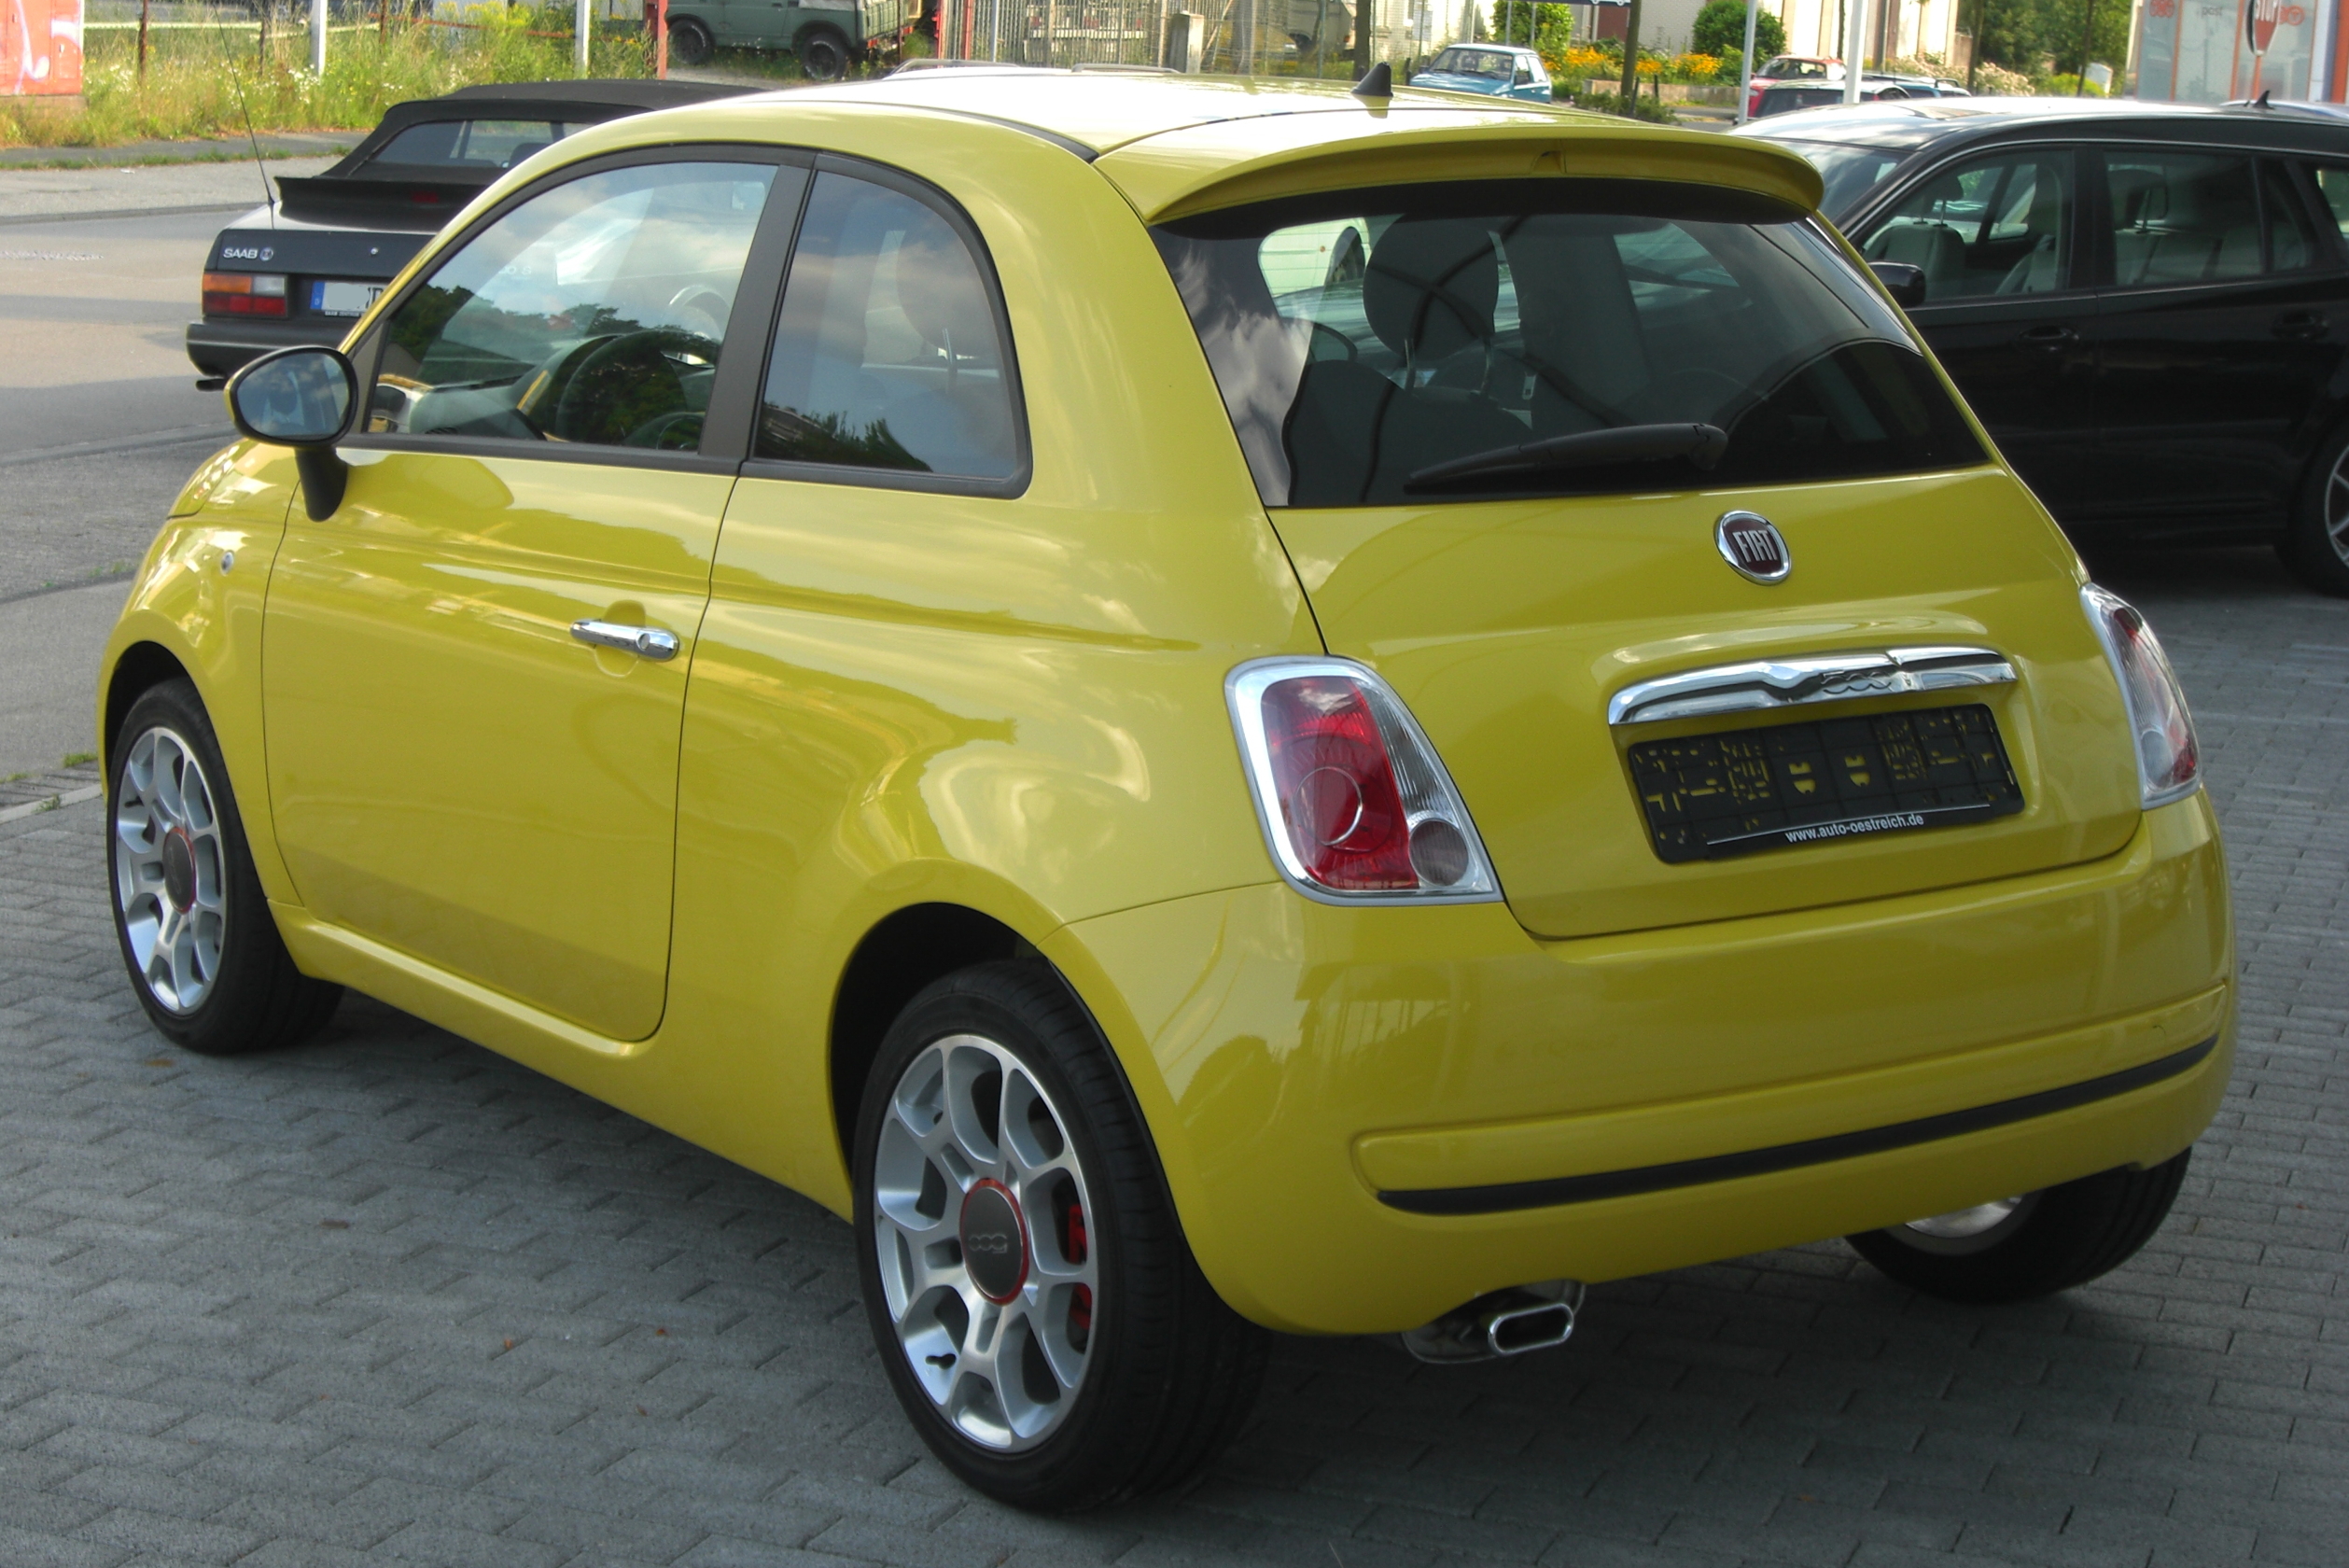 Fiat 500 1.4 16V technical details, history, photos on